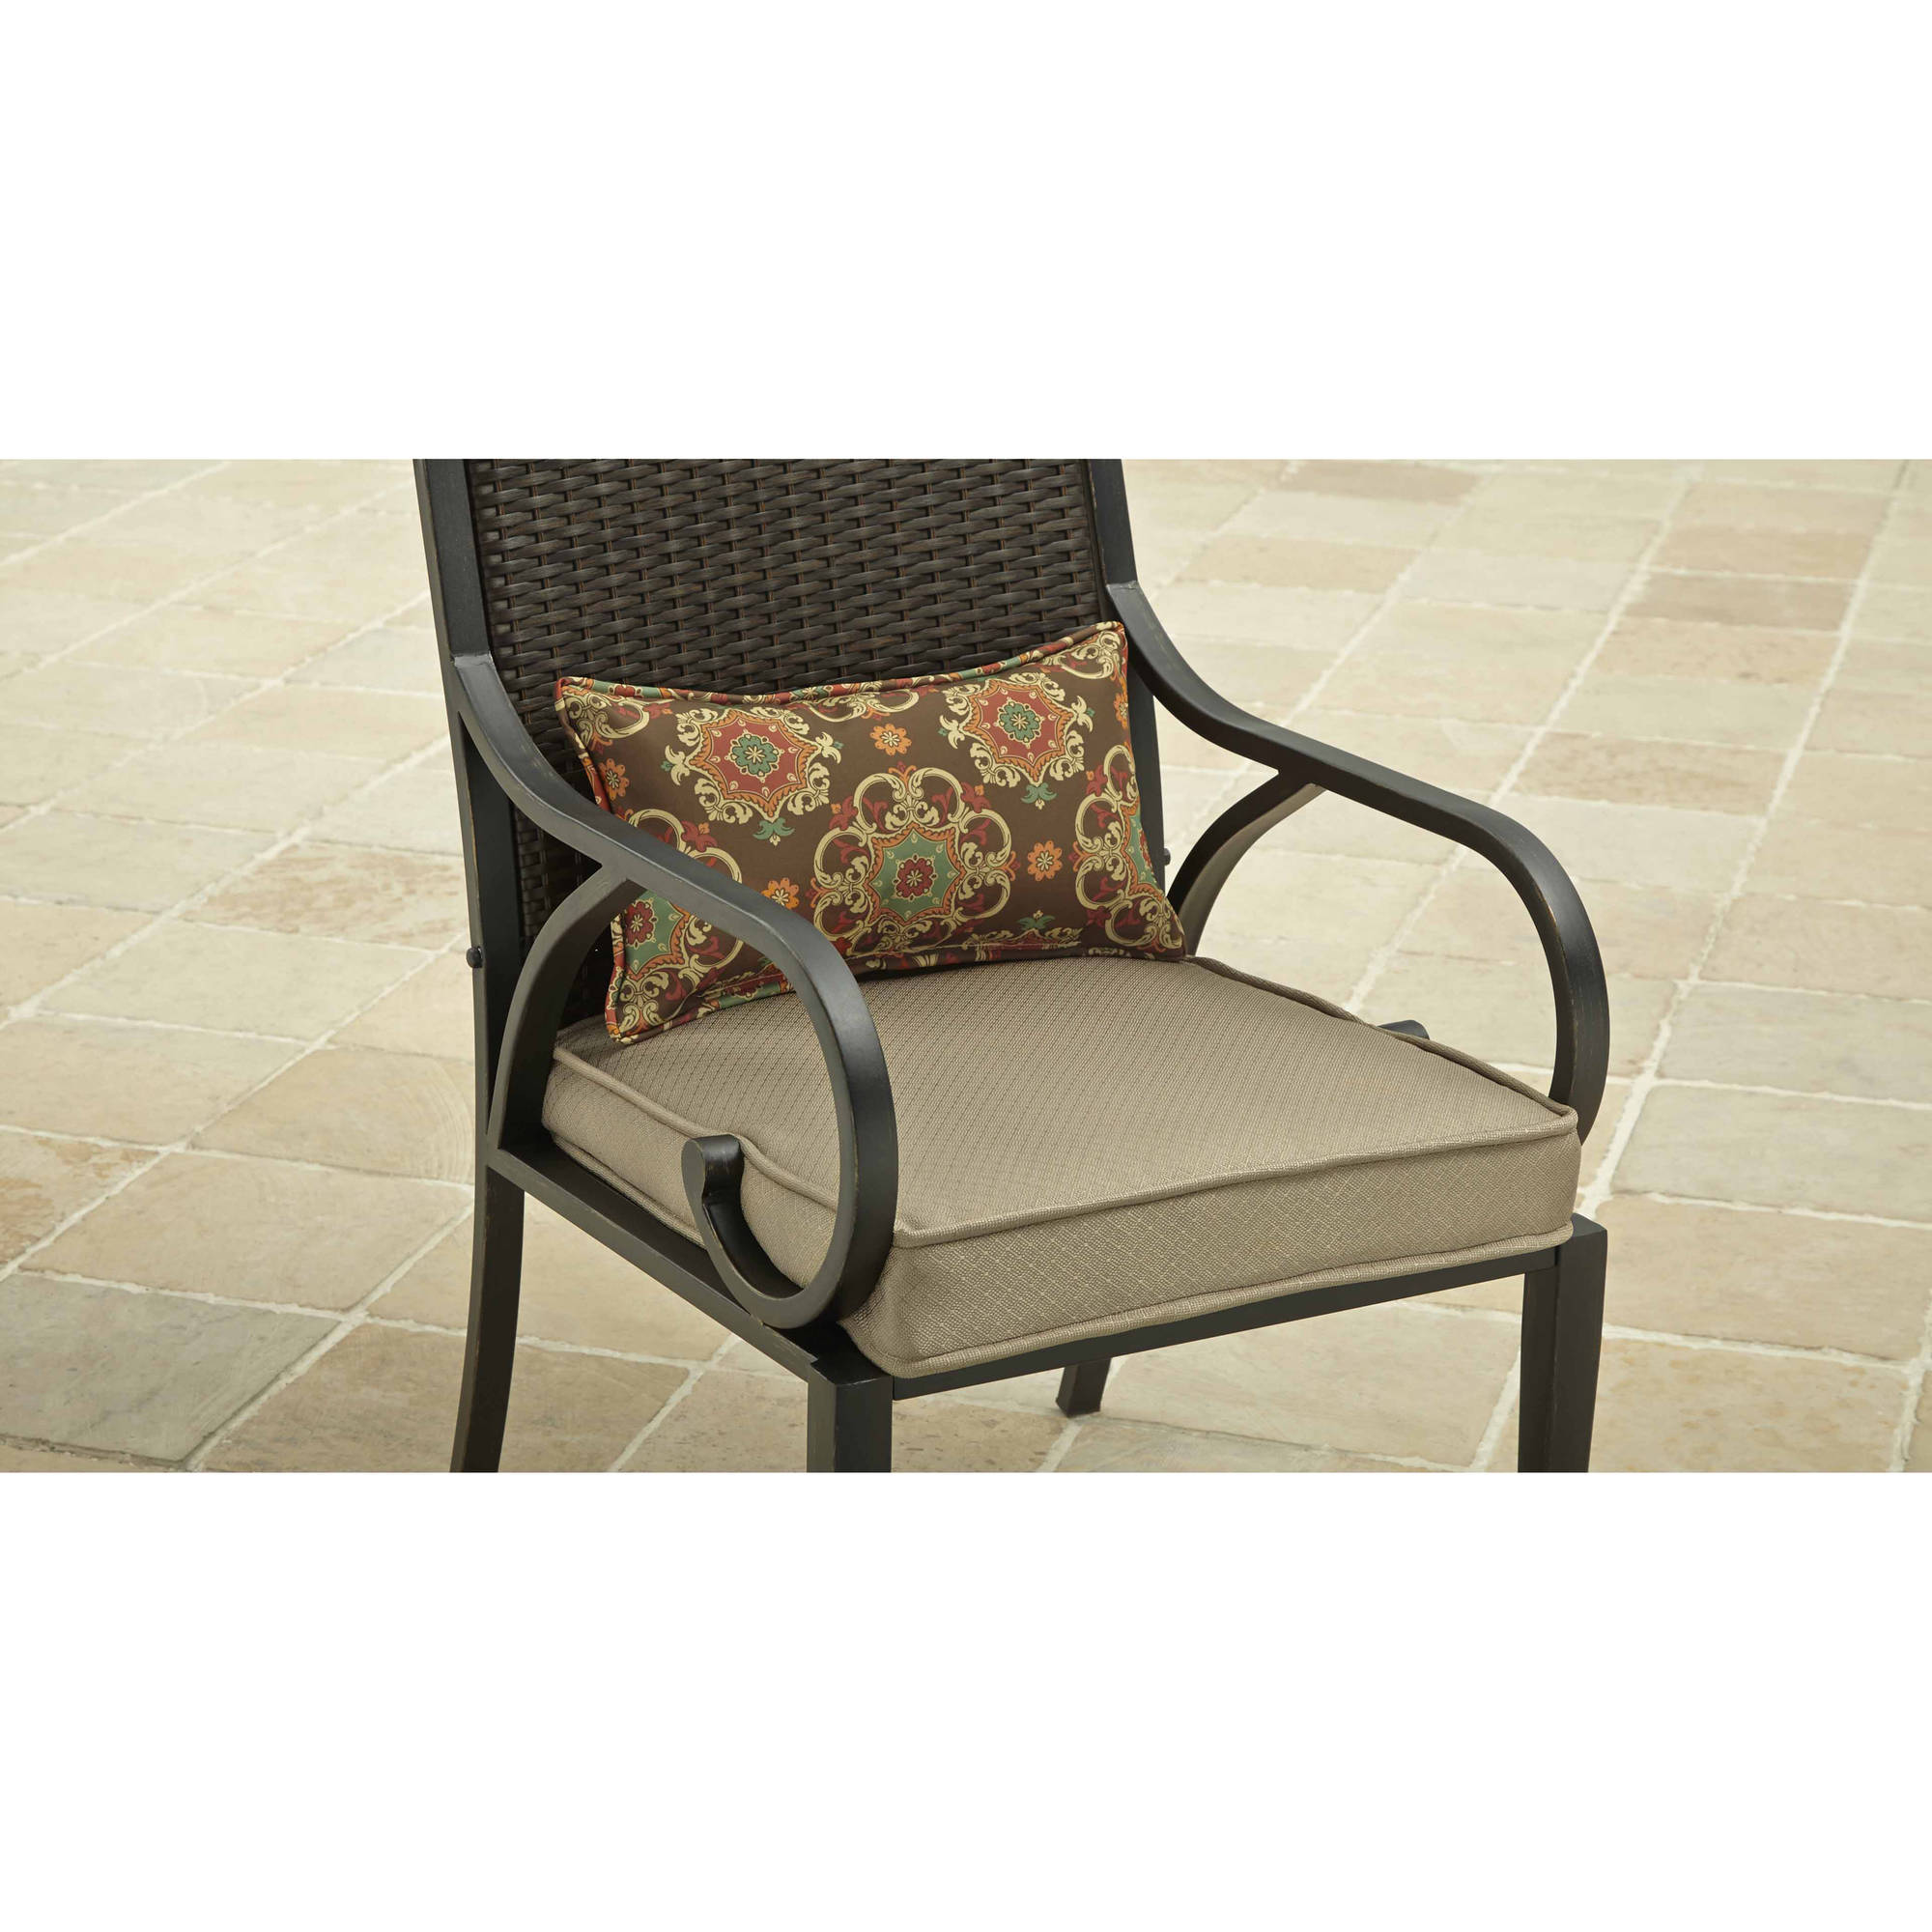 Better Homes and Gardens Layton Ridge Outdoor Dining Chair, Set of 6 - image 1 of 2